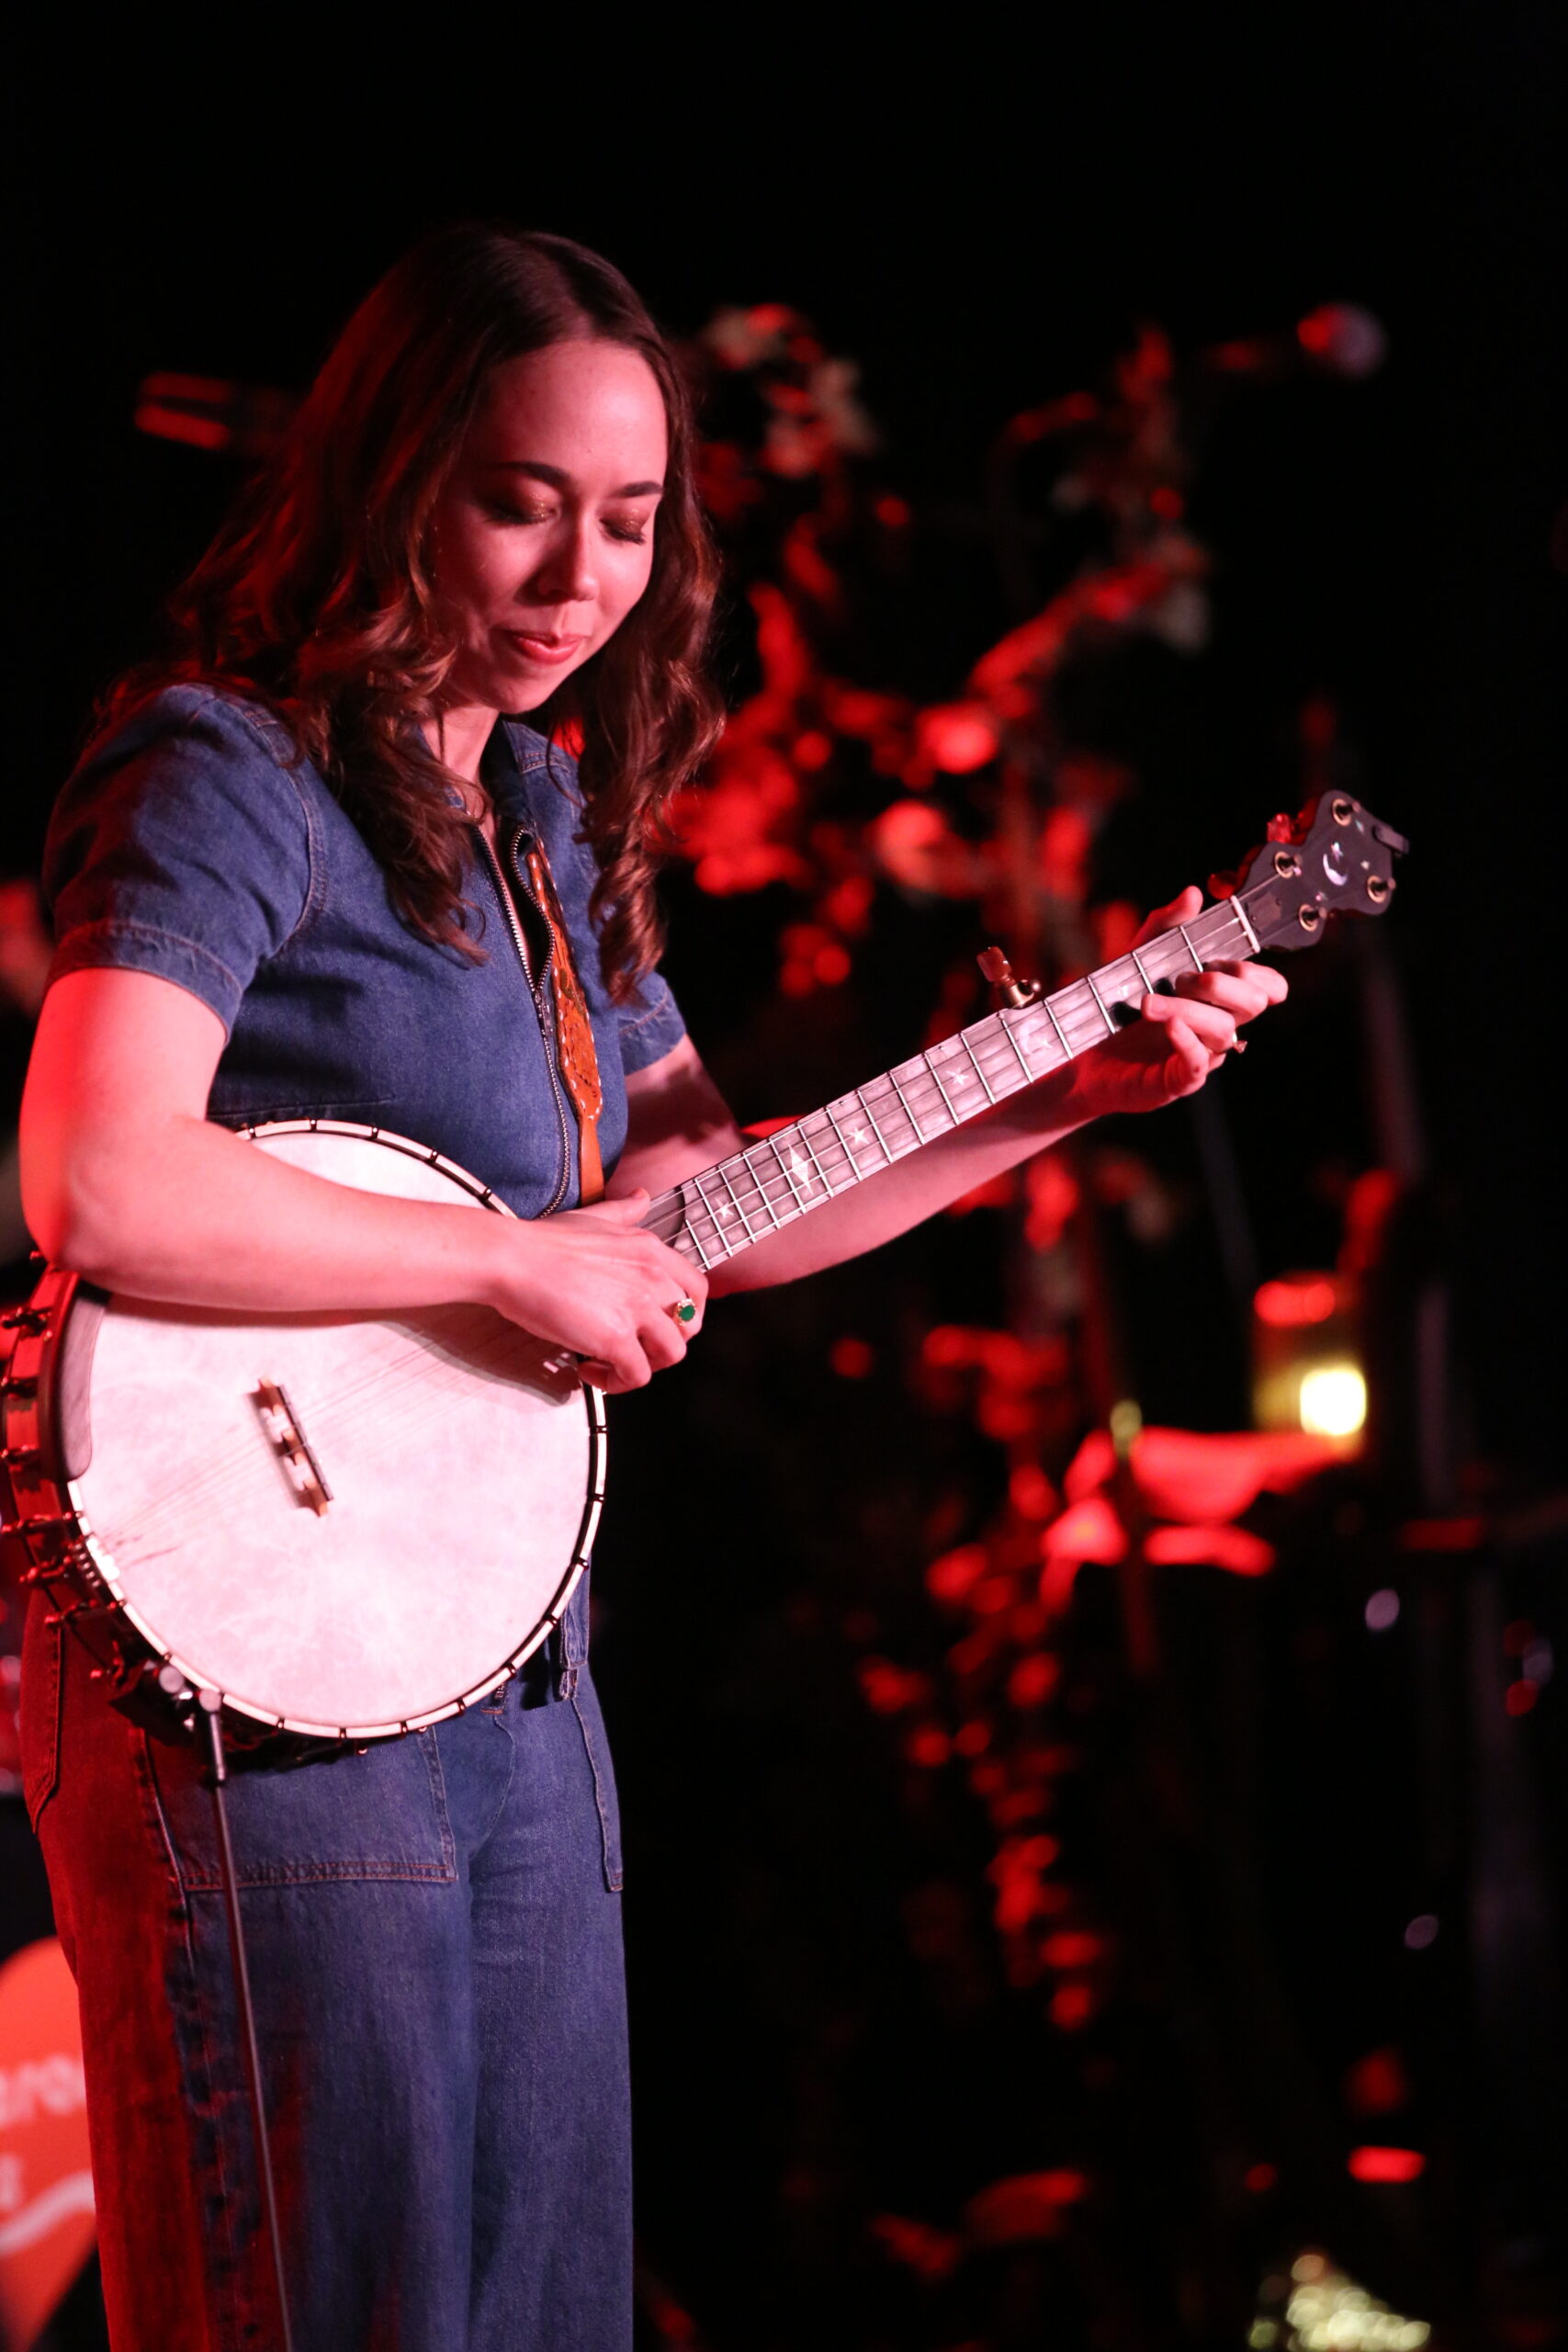 Sarah Jarosz plays a special intimate show in Asheville.